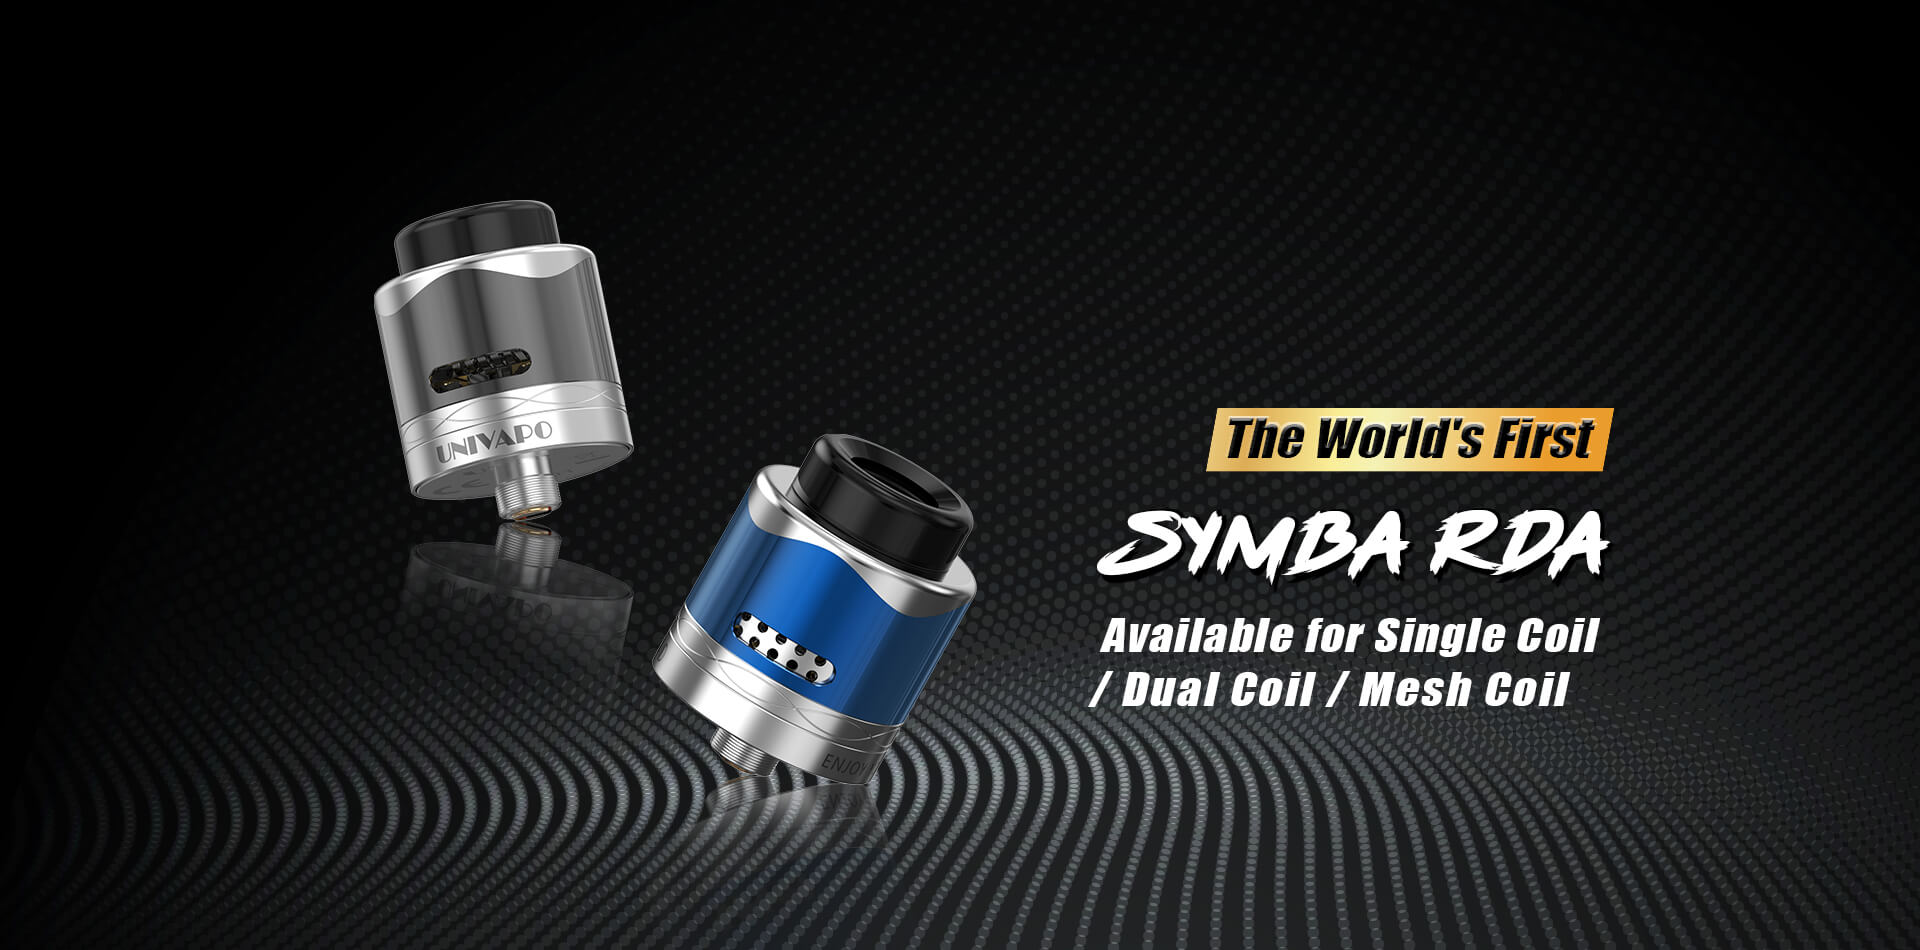 symba-rda  -  3 colors available - A true pioneer Symba PDA,the first RDA supports both mesh coil and regular coil in the world.brings you a more versatile vaping experience,gives you the max possibility to build your own tank.-7